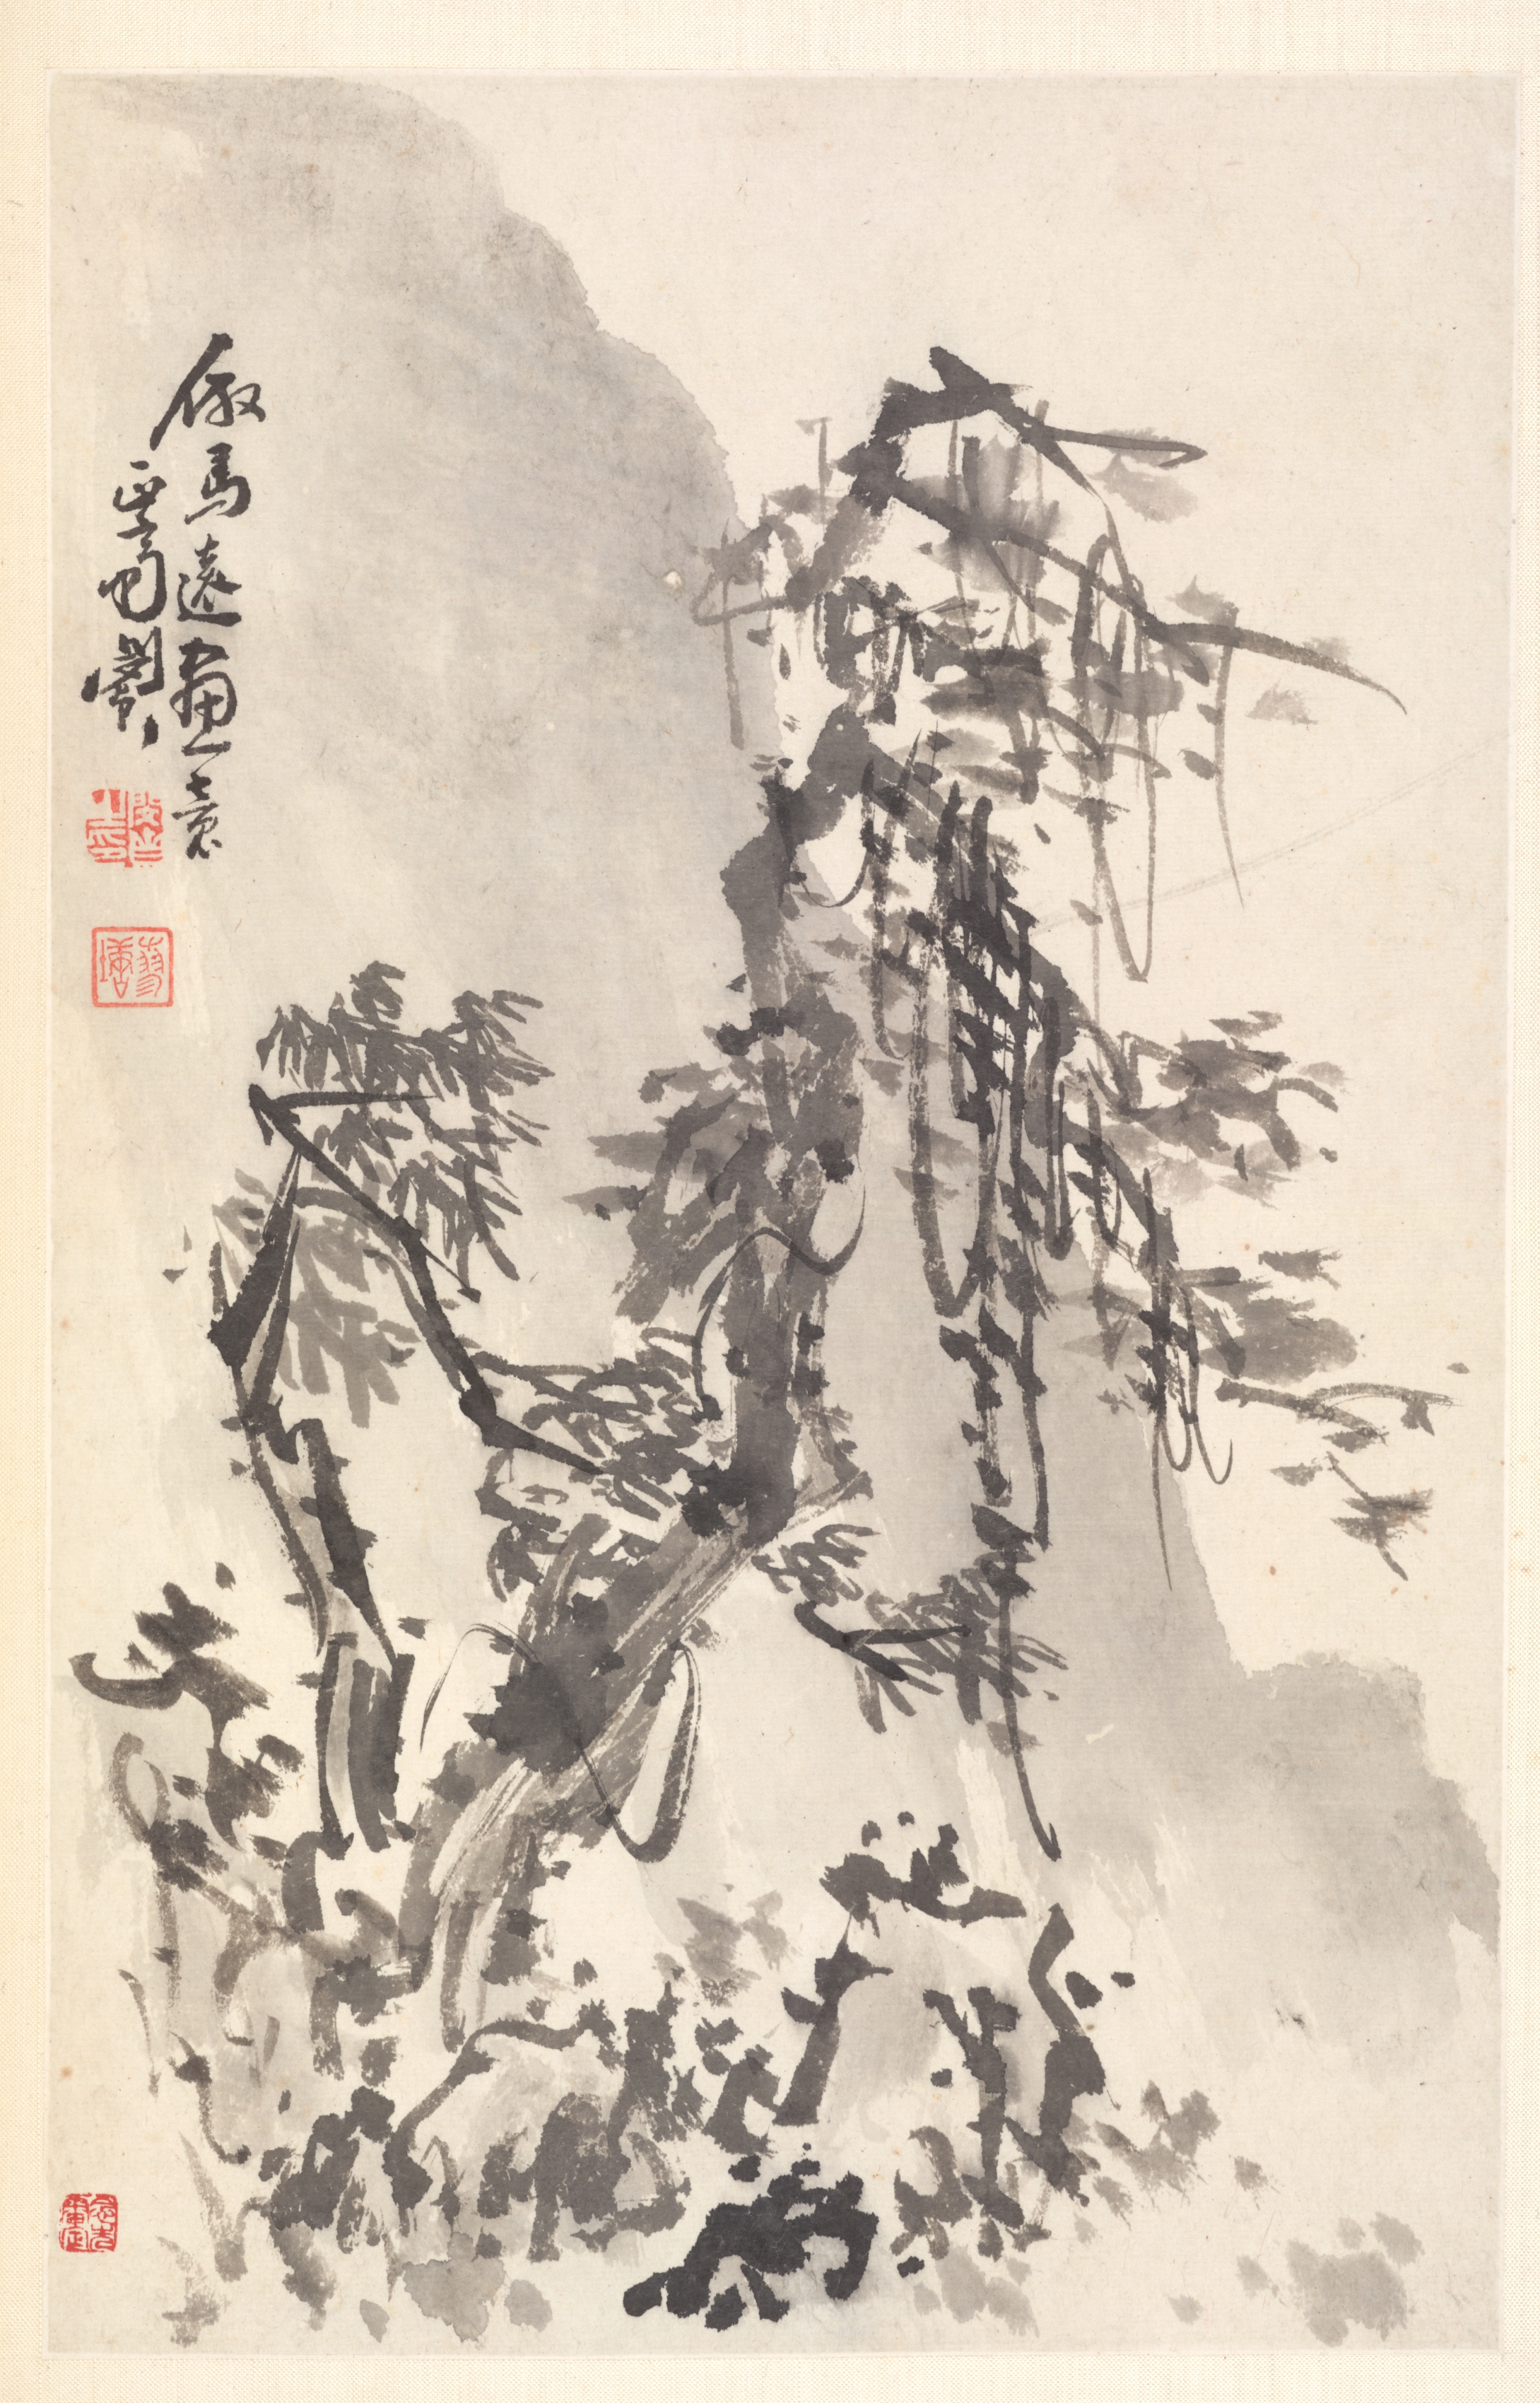 Landscape in the Manner of Ma Yuan